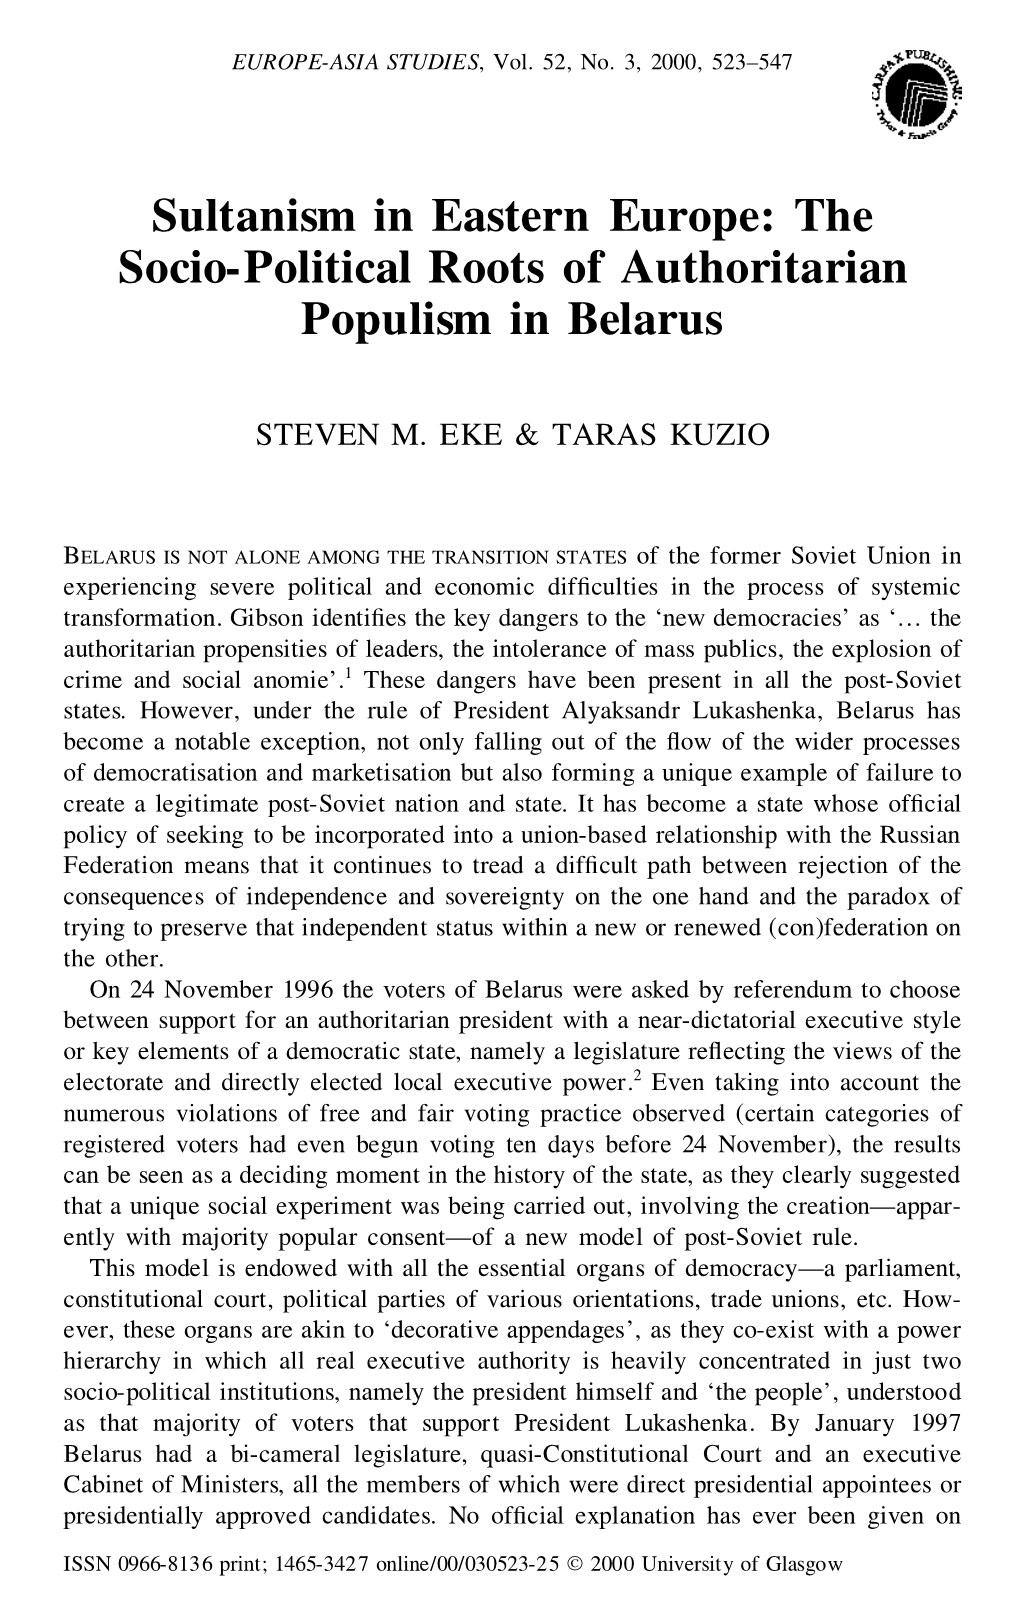 Sultanism in Eastern Europe: the Socio-Political Roots of Authoritarian Populism in Belarus